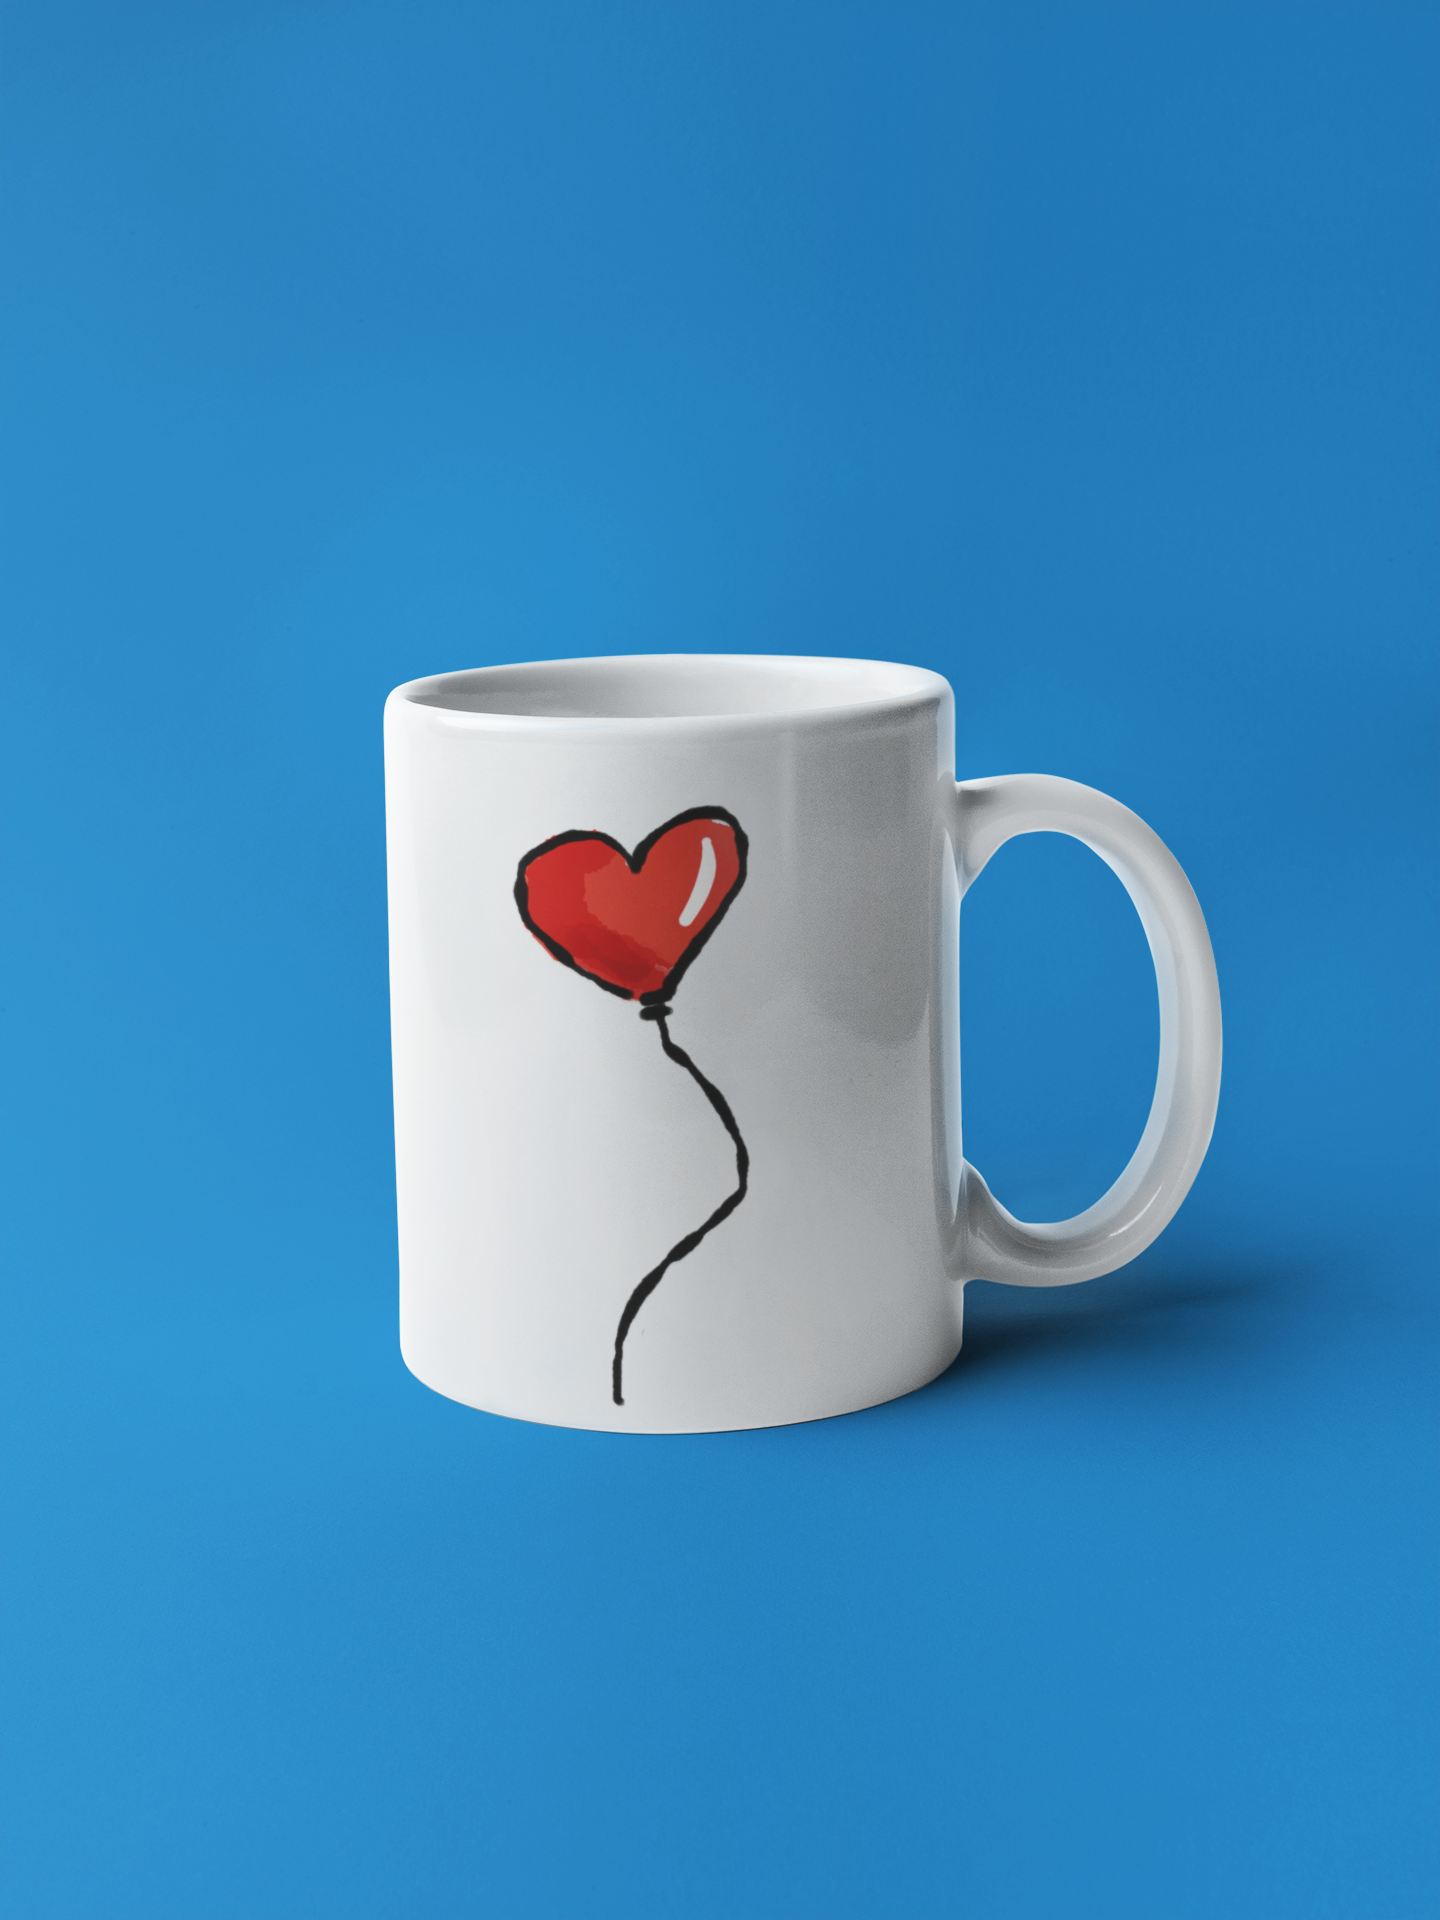 Red Heart Balloon I Love you illustration by Hector and Bone printed on a quality ceramic coffee mug